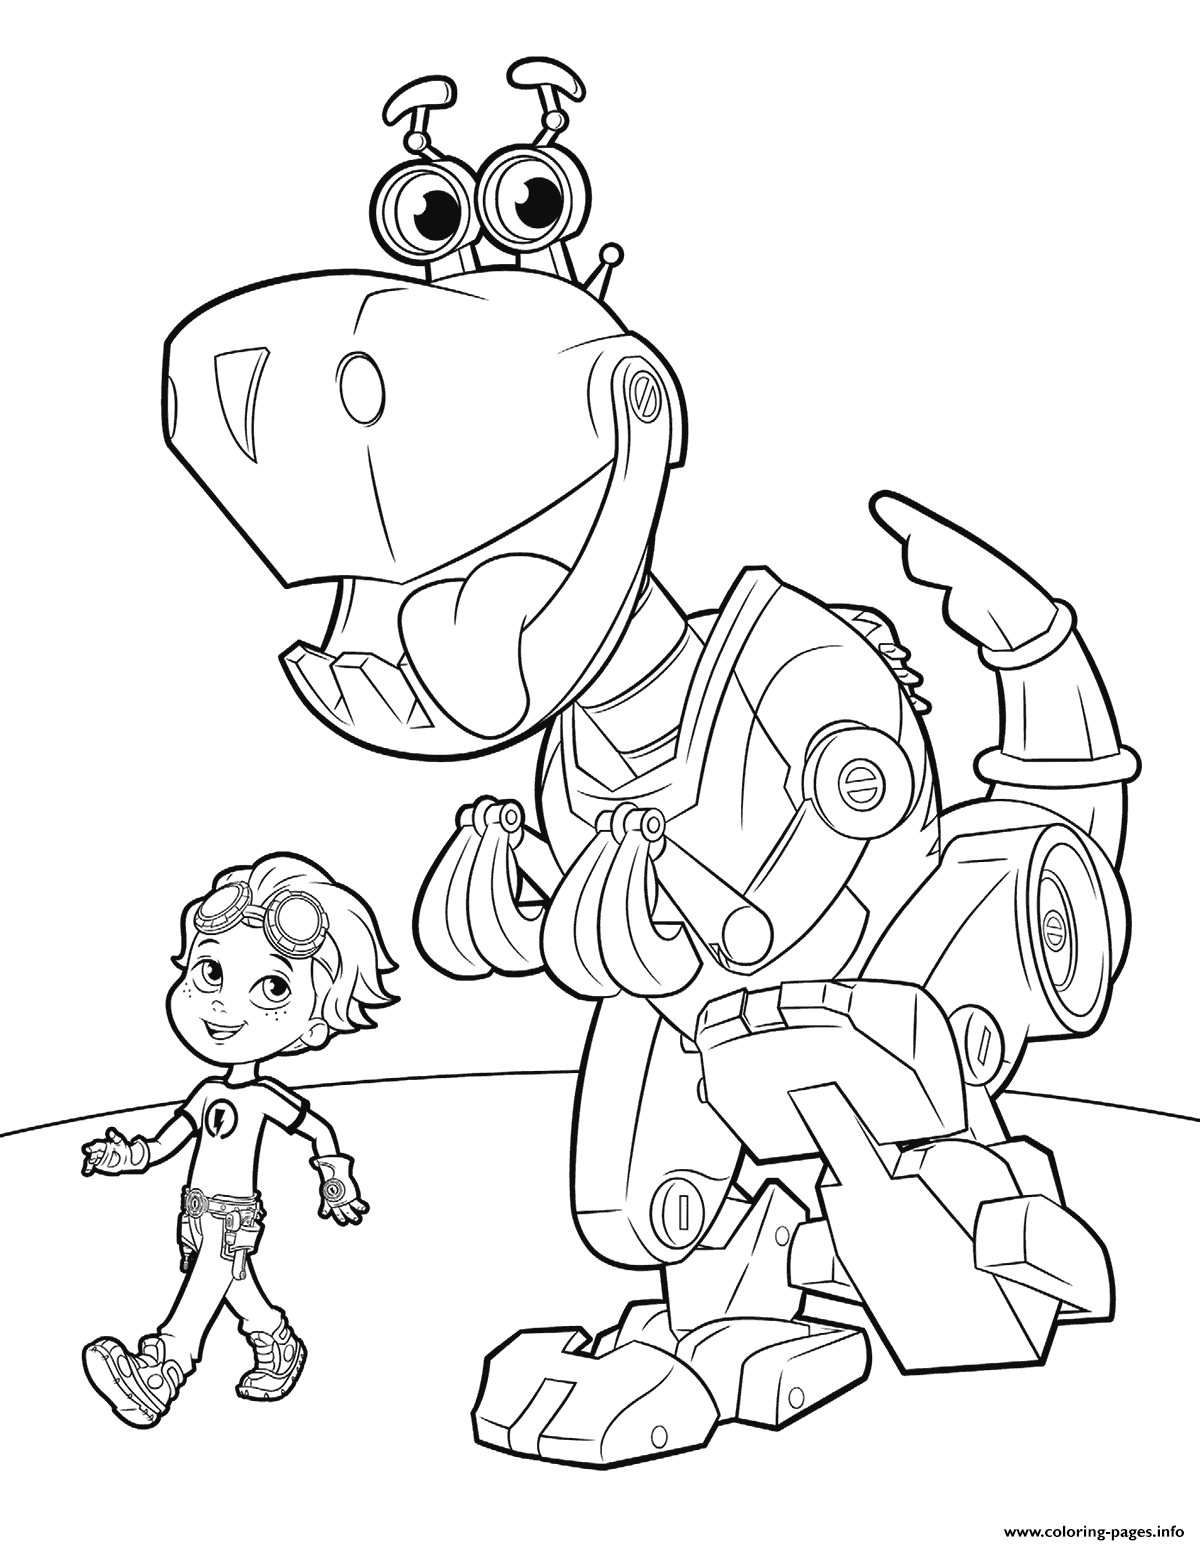 Rusty Rivets For Boys coloring